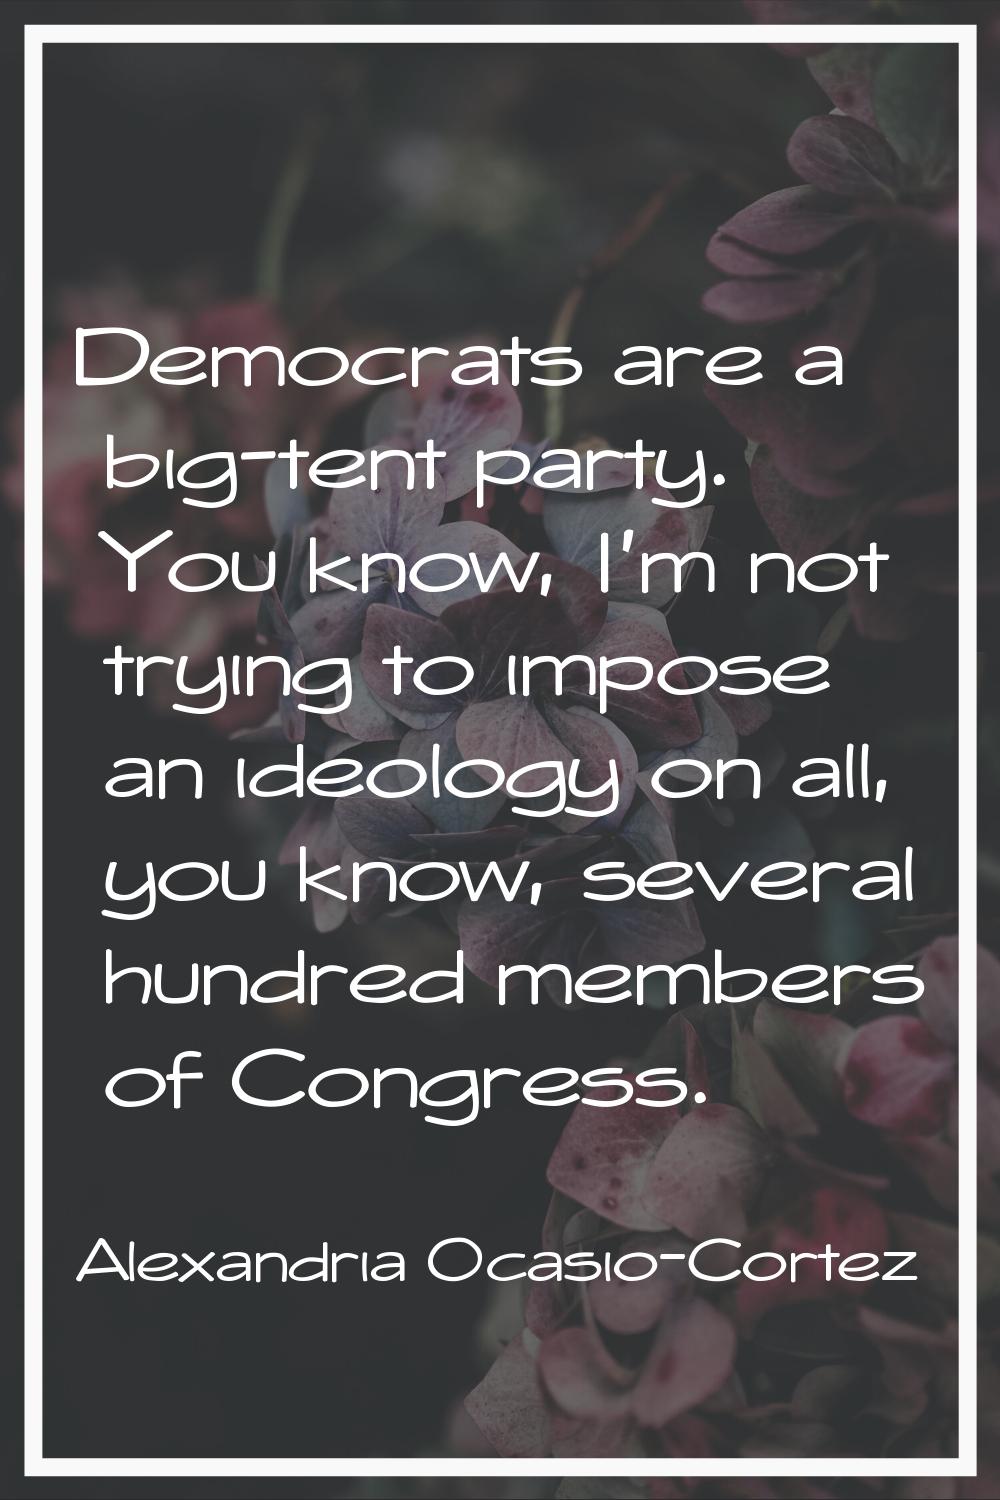 Democrats are a big-tent party. You know, I'm not trying to impose an ideology on all, you know, se